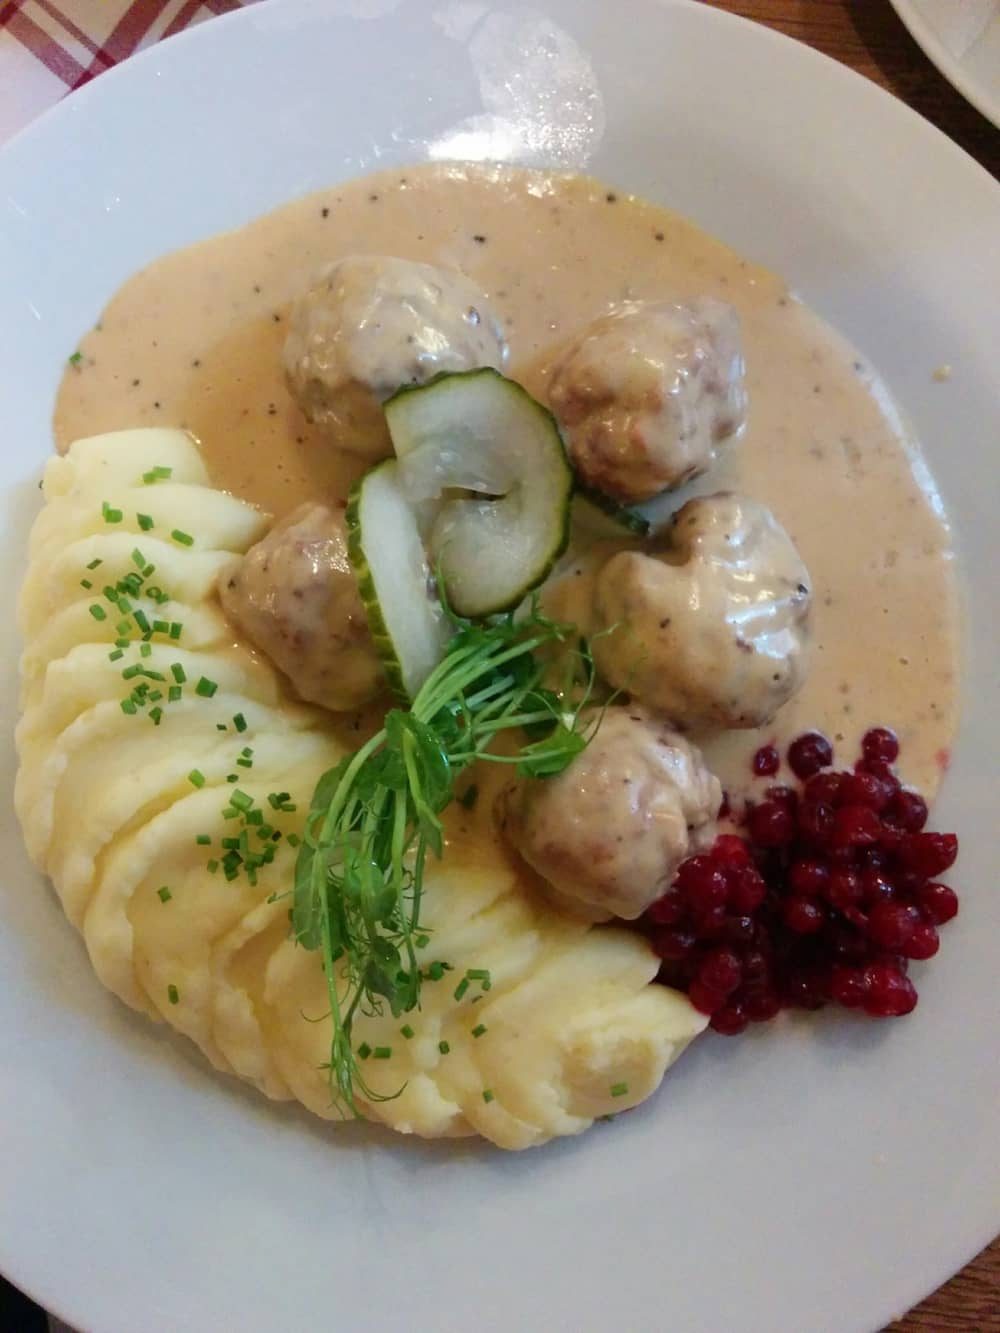 Traditional Swedish Meatballs with Lingonberries, Gravy and Whipped Potatoes